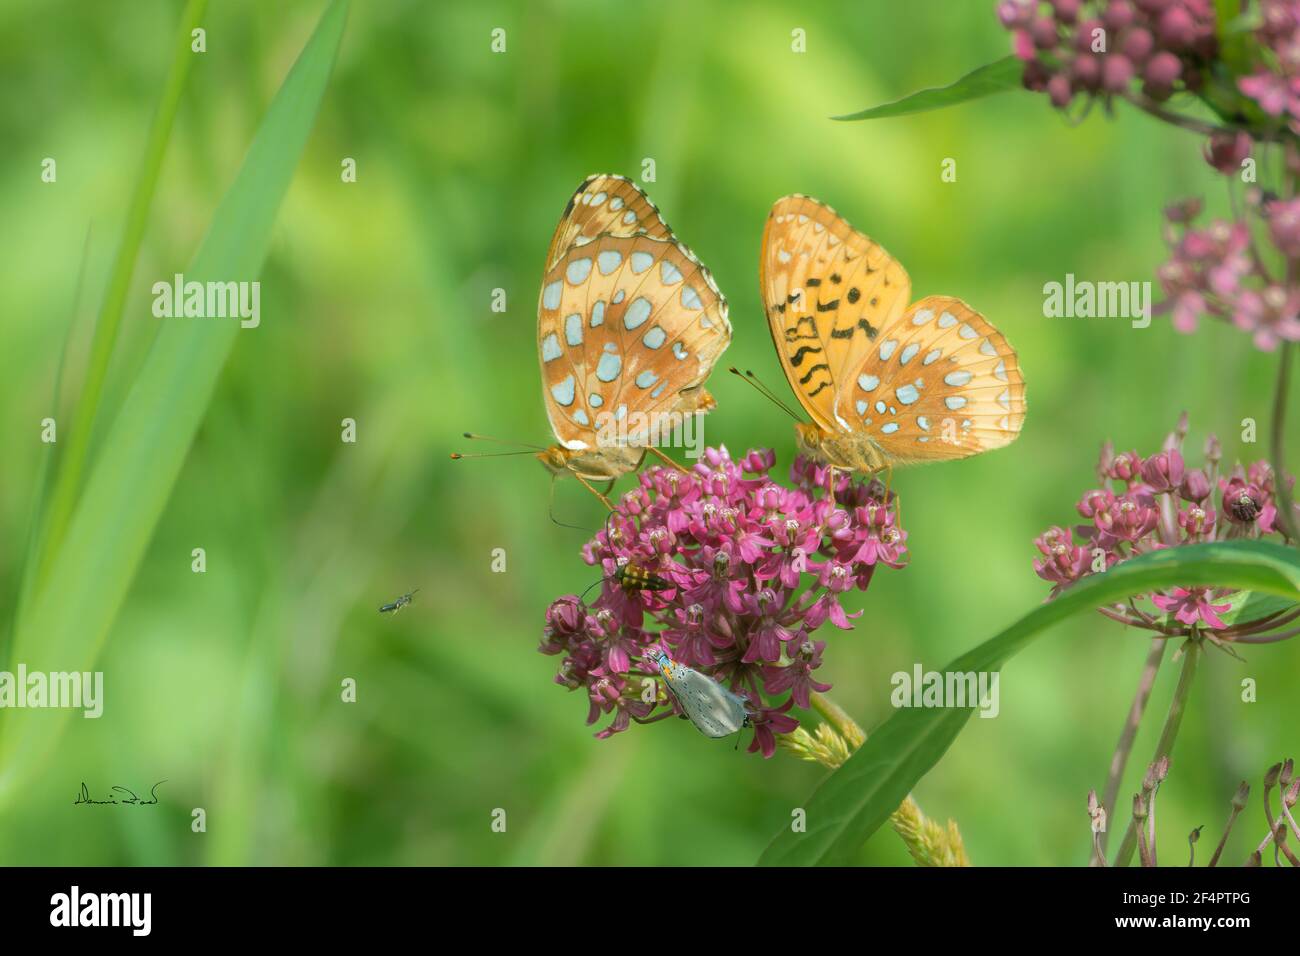 Aphrodite Fritillary (Speyeria aphrodite) butterflies sharing space on pink Joe-Pye weed flowers while sipping nectar, Stock Photo